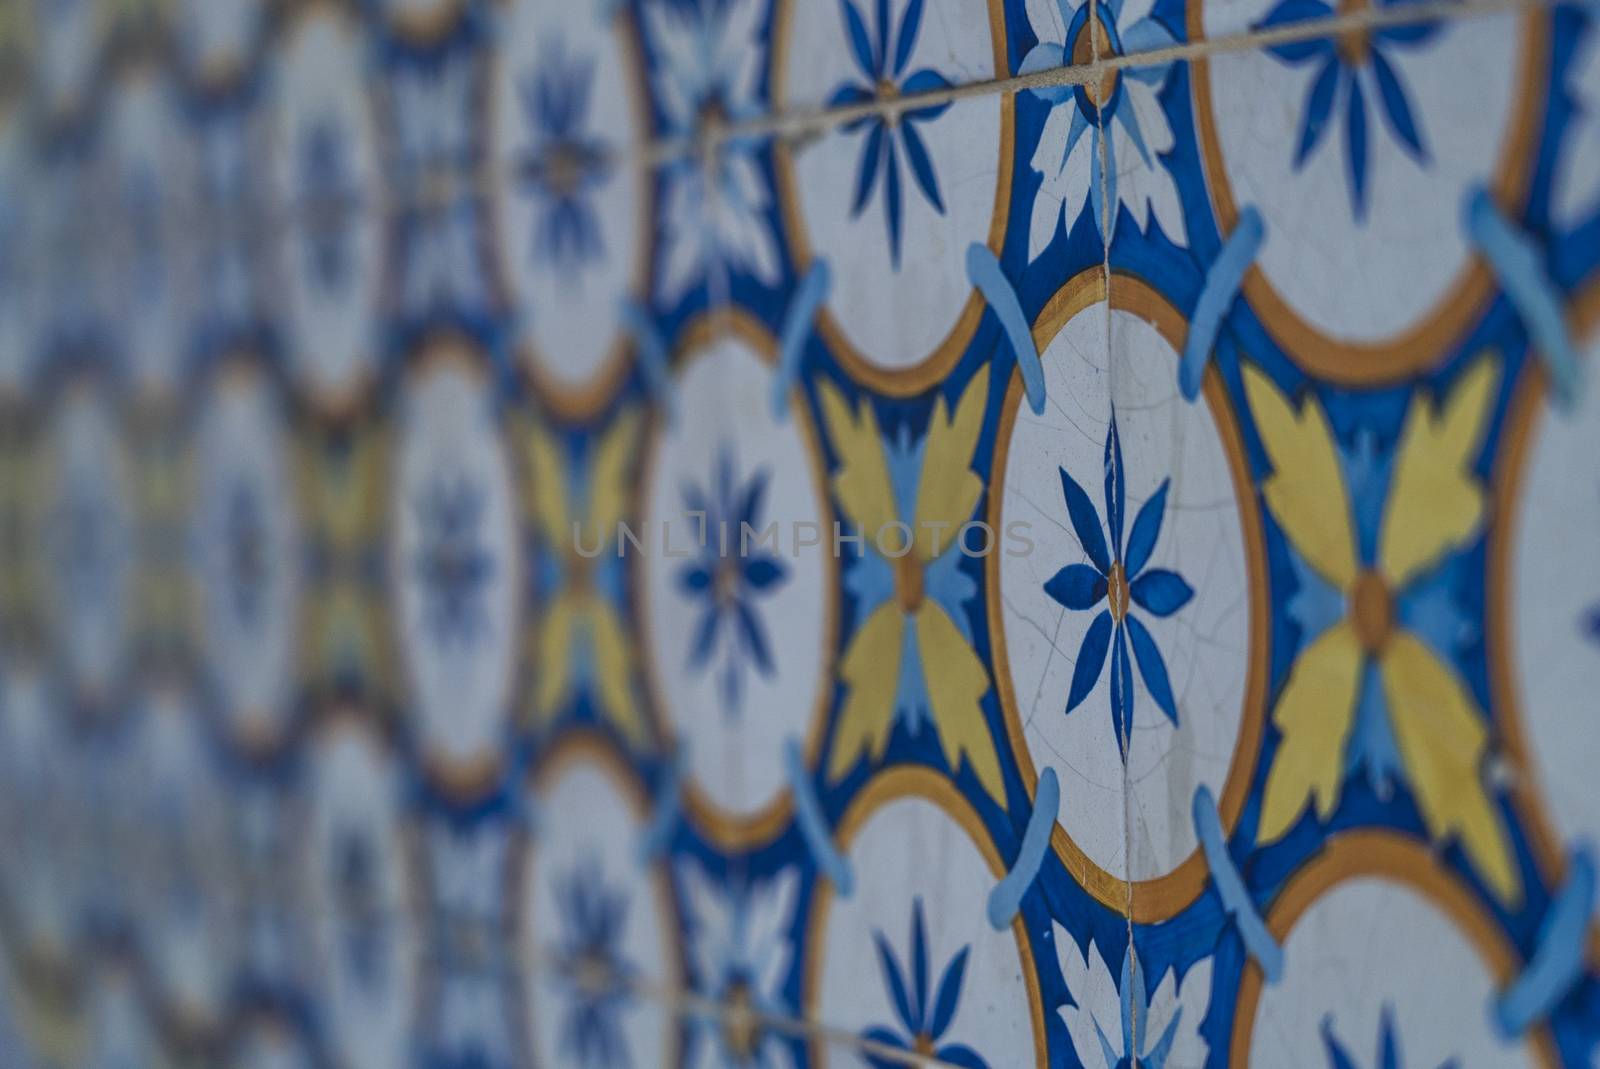 blue white and yellow lisbon tiles hand made flower pattern